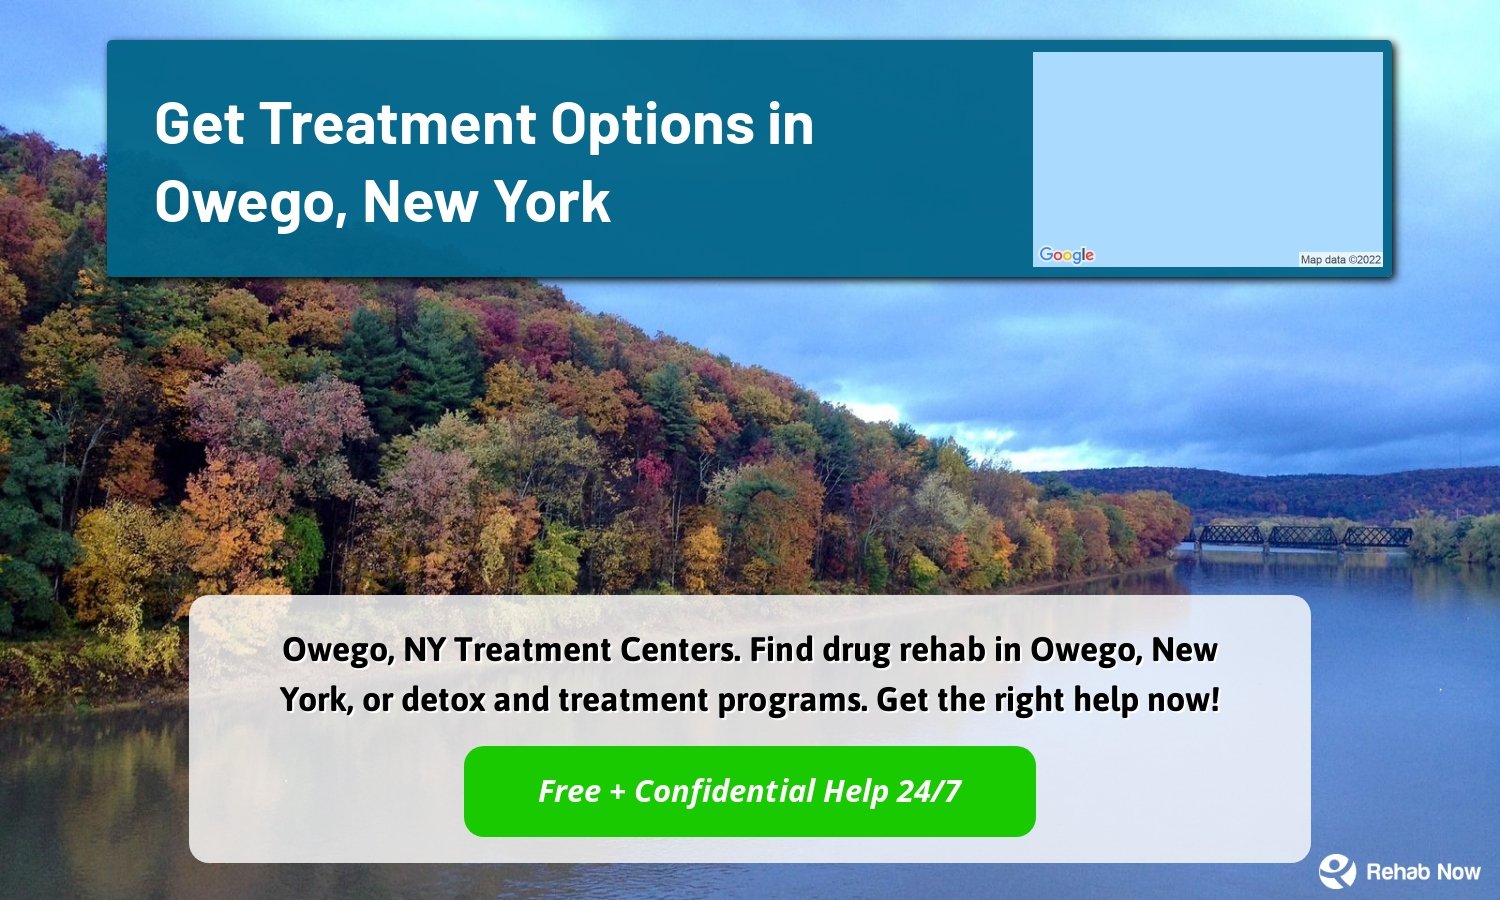 Owego, NY Treatment Centers. Find drug rehab in Owego, New York, or detox and treatment programs. Get the right help now!